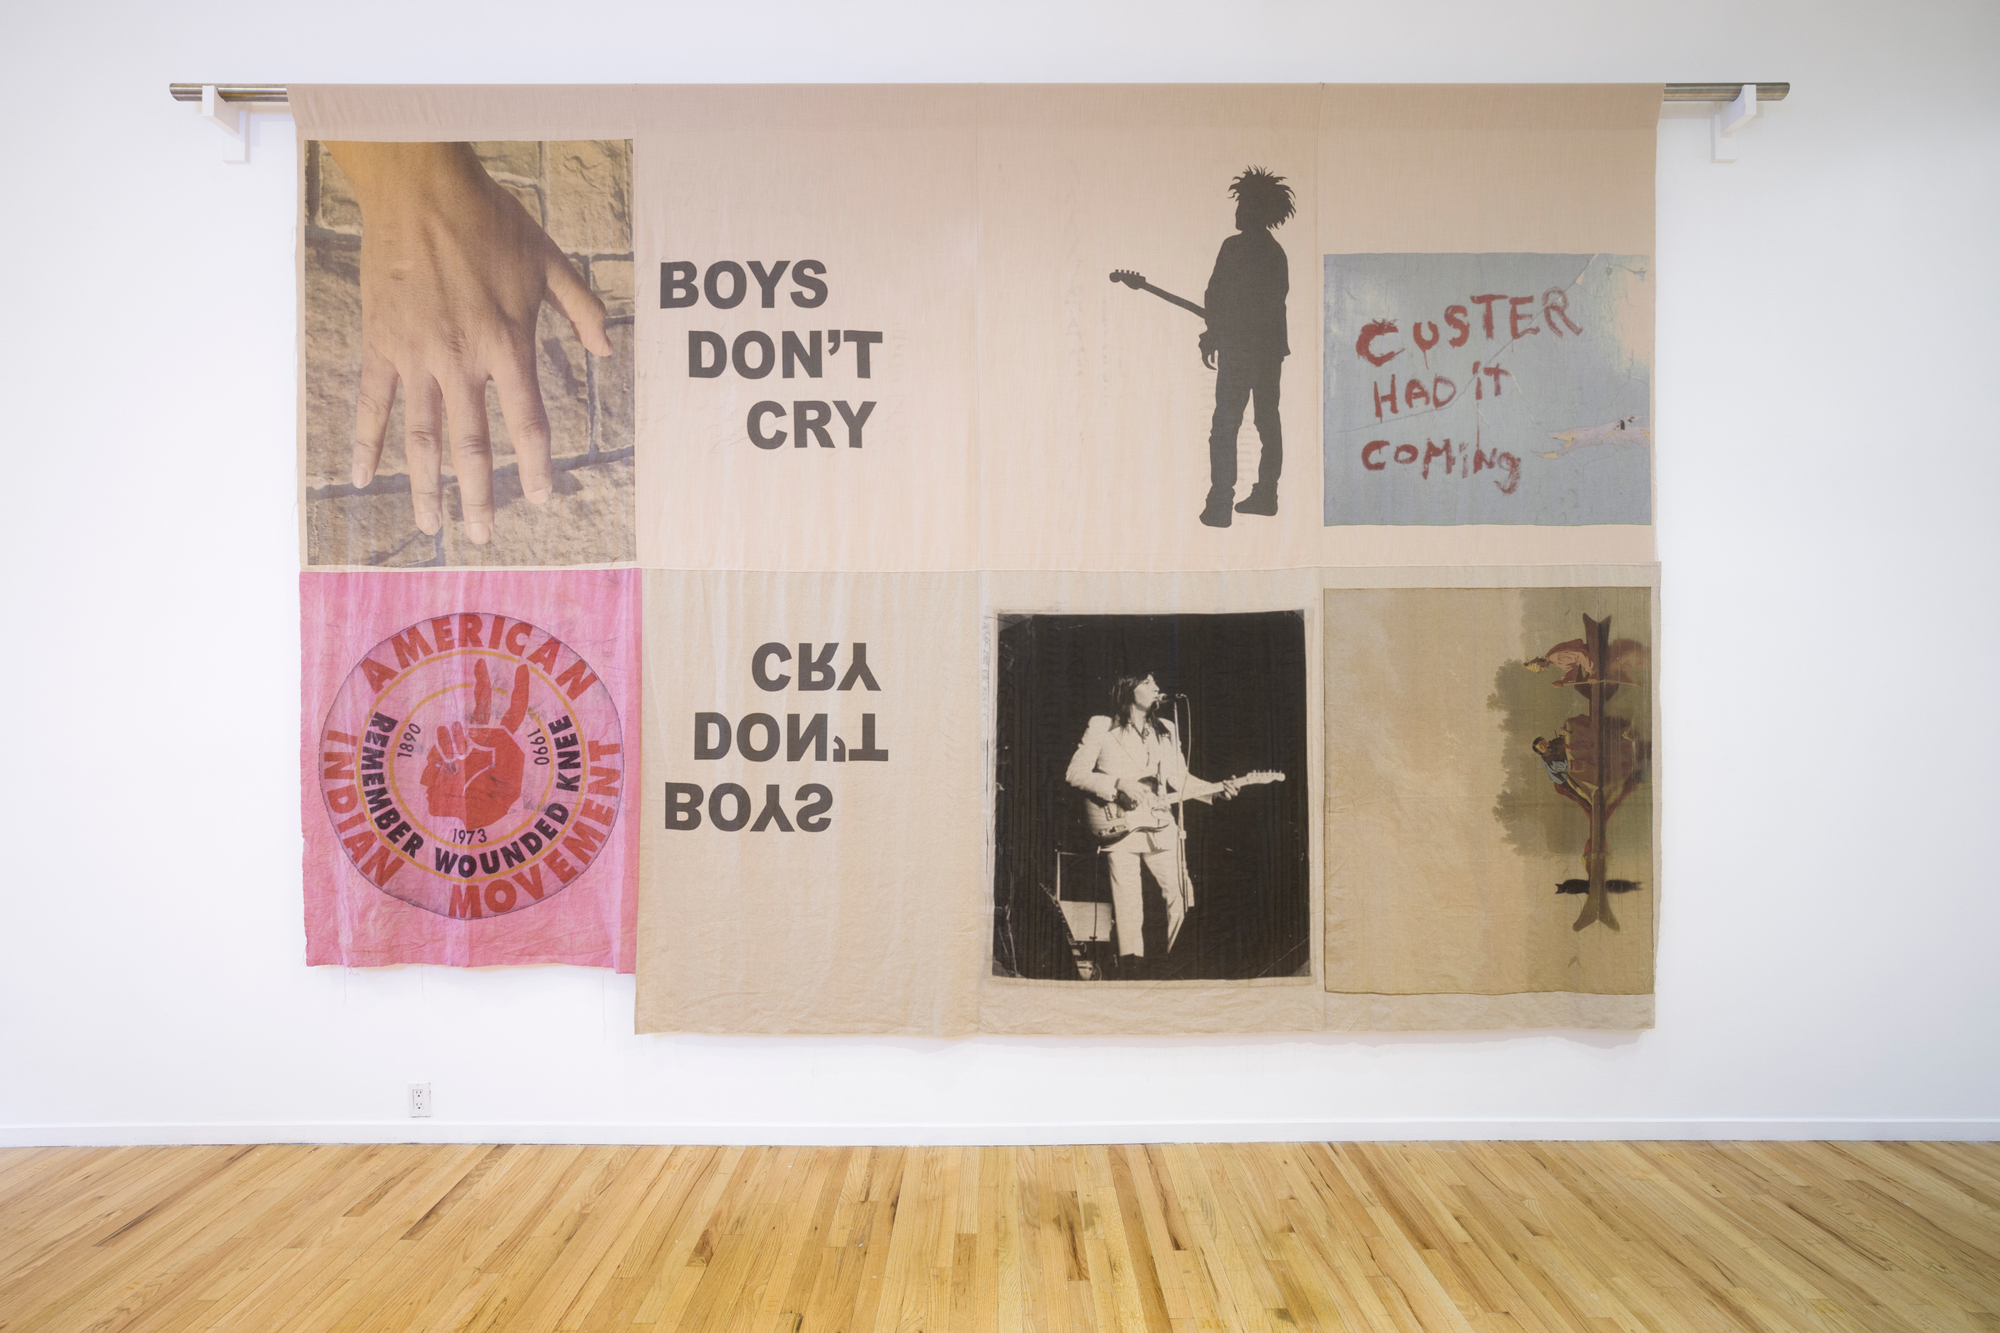 Hanging textile with patchwork of images of bands and slogans like "boys don't cry" and "Custer had it coming"